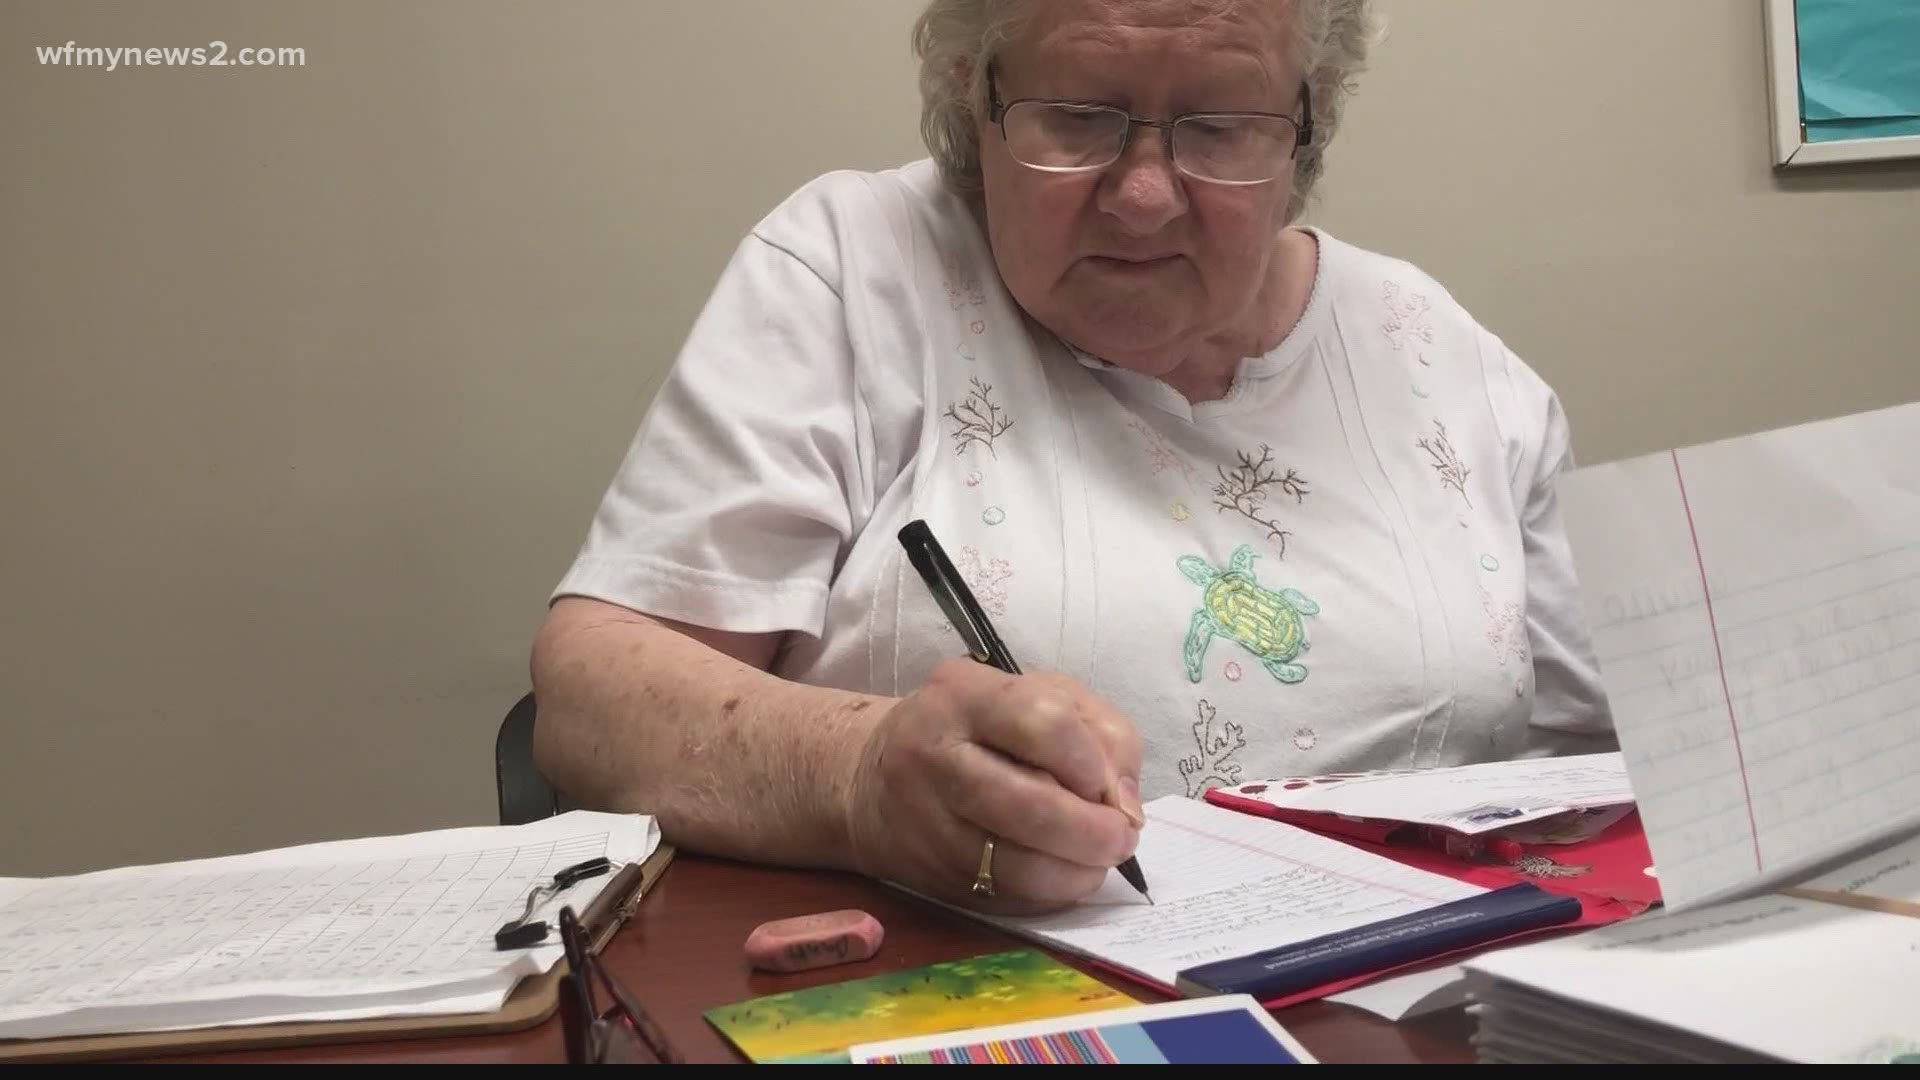 Residents were growing lonely with safety restrictions put in place. Unable to visit family, they had some extra time on their hands, so they started writing.